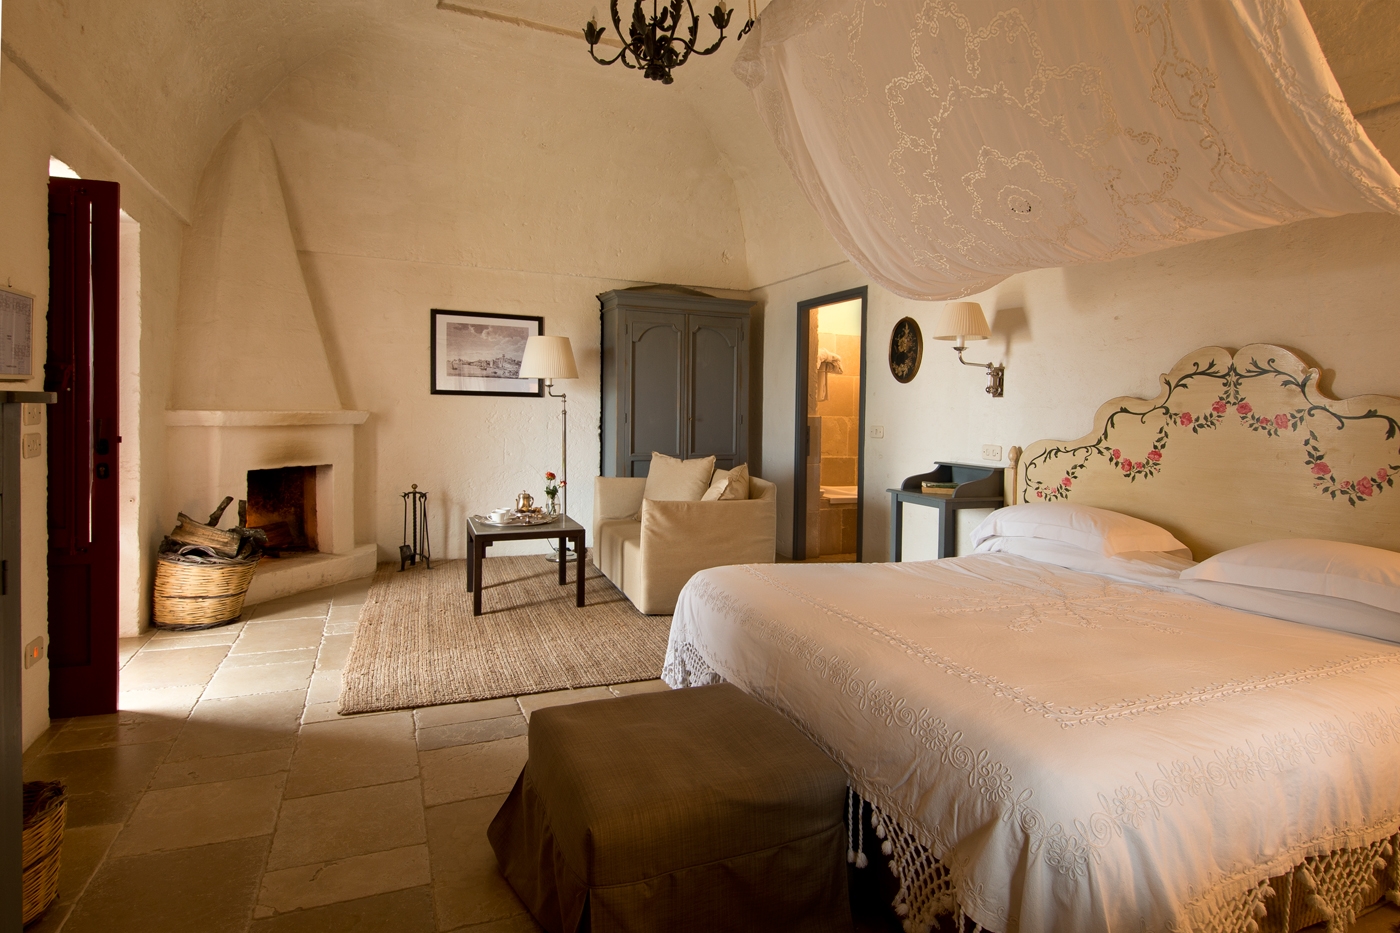 Junior Suite at luxury hotel Masseria Torre Coccaro in Italy with fireplace and seating area